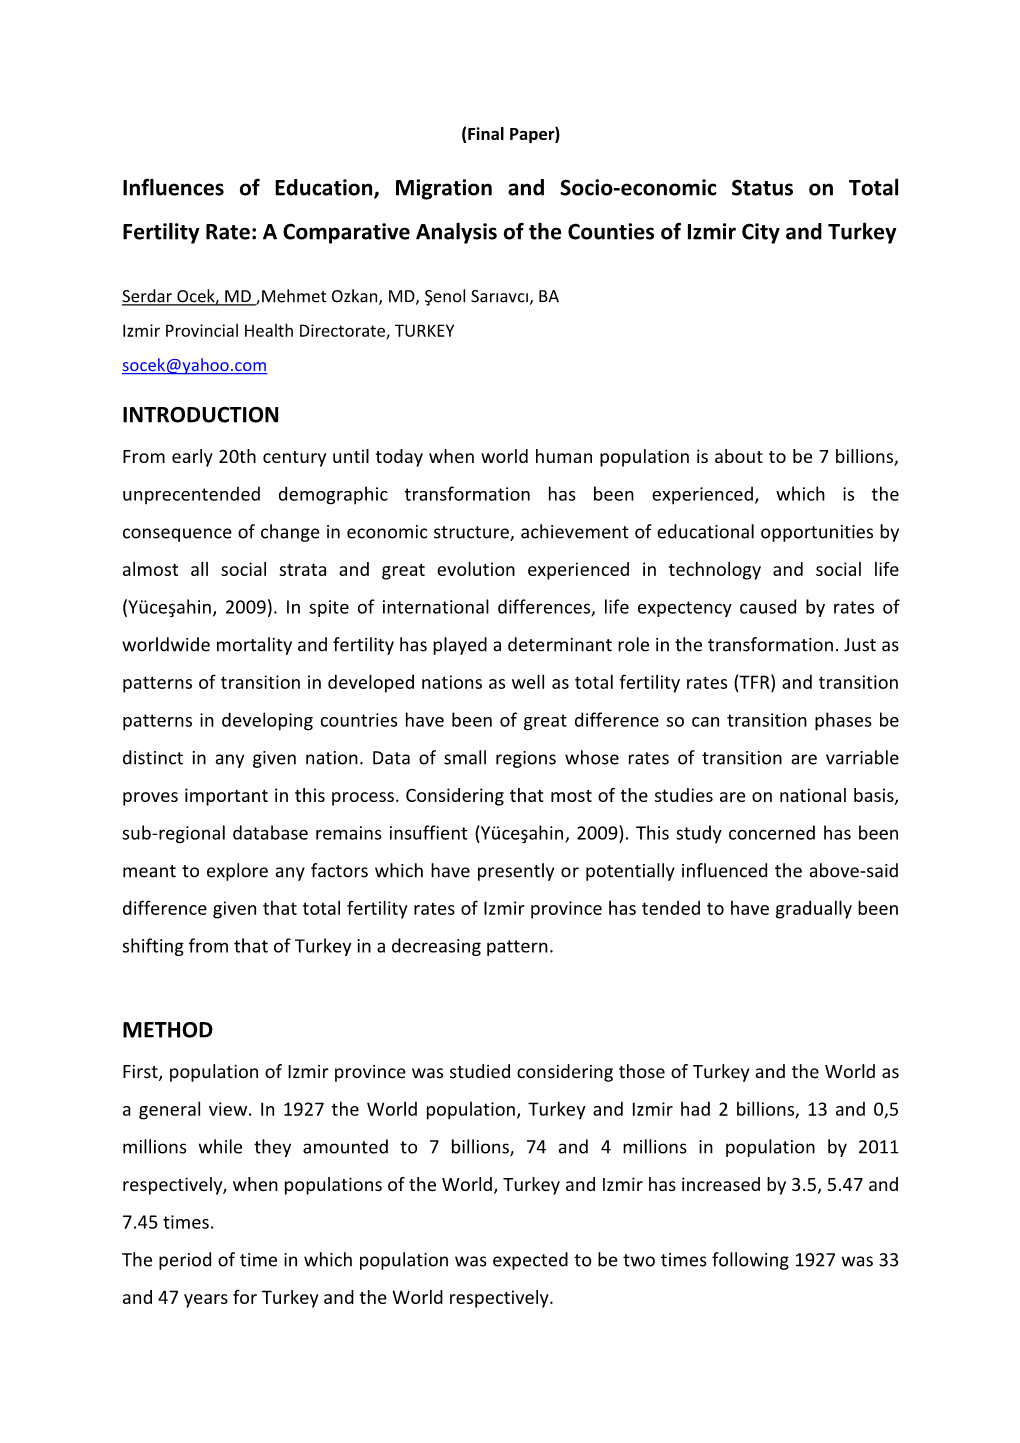 Influences of Education, Migration and Socio-Economic Status on Total Fertility Rate: a Comparative Analysis of the Counties of Izmir City and Turkey